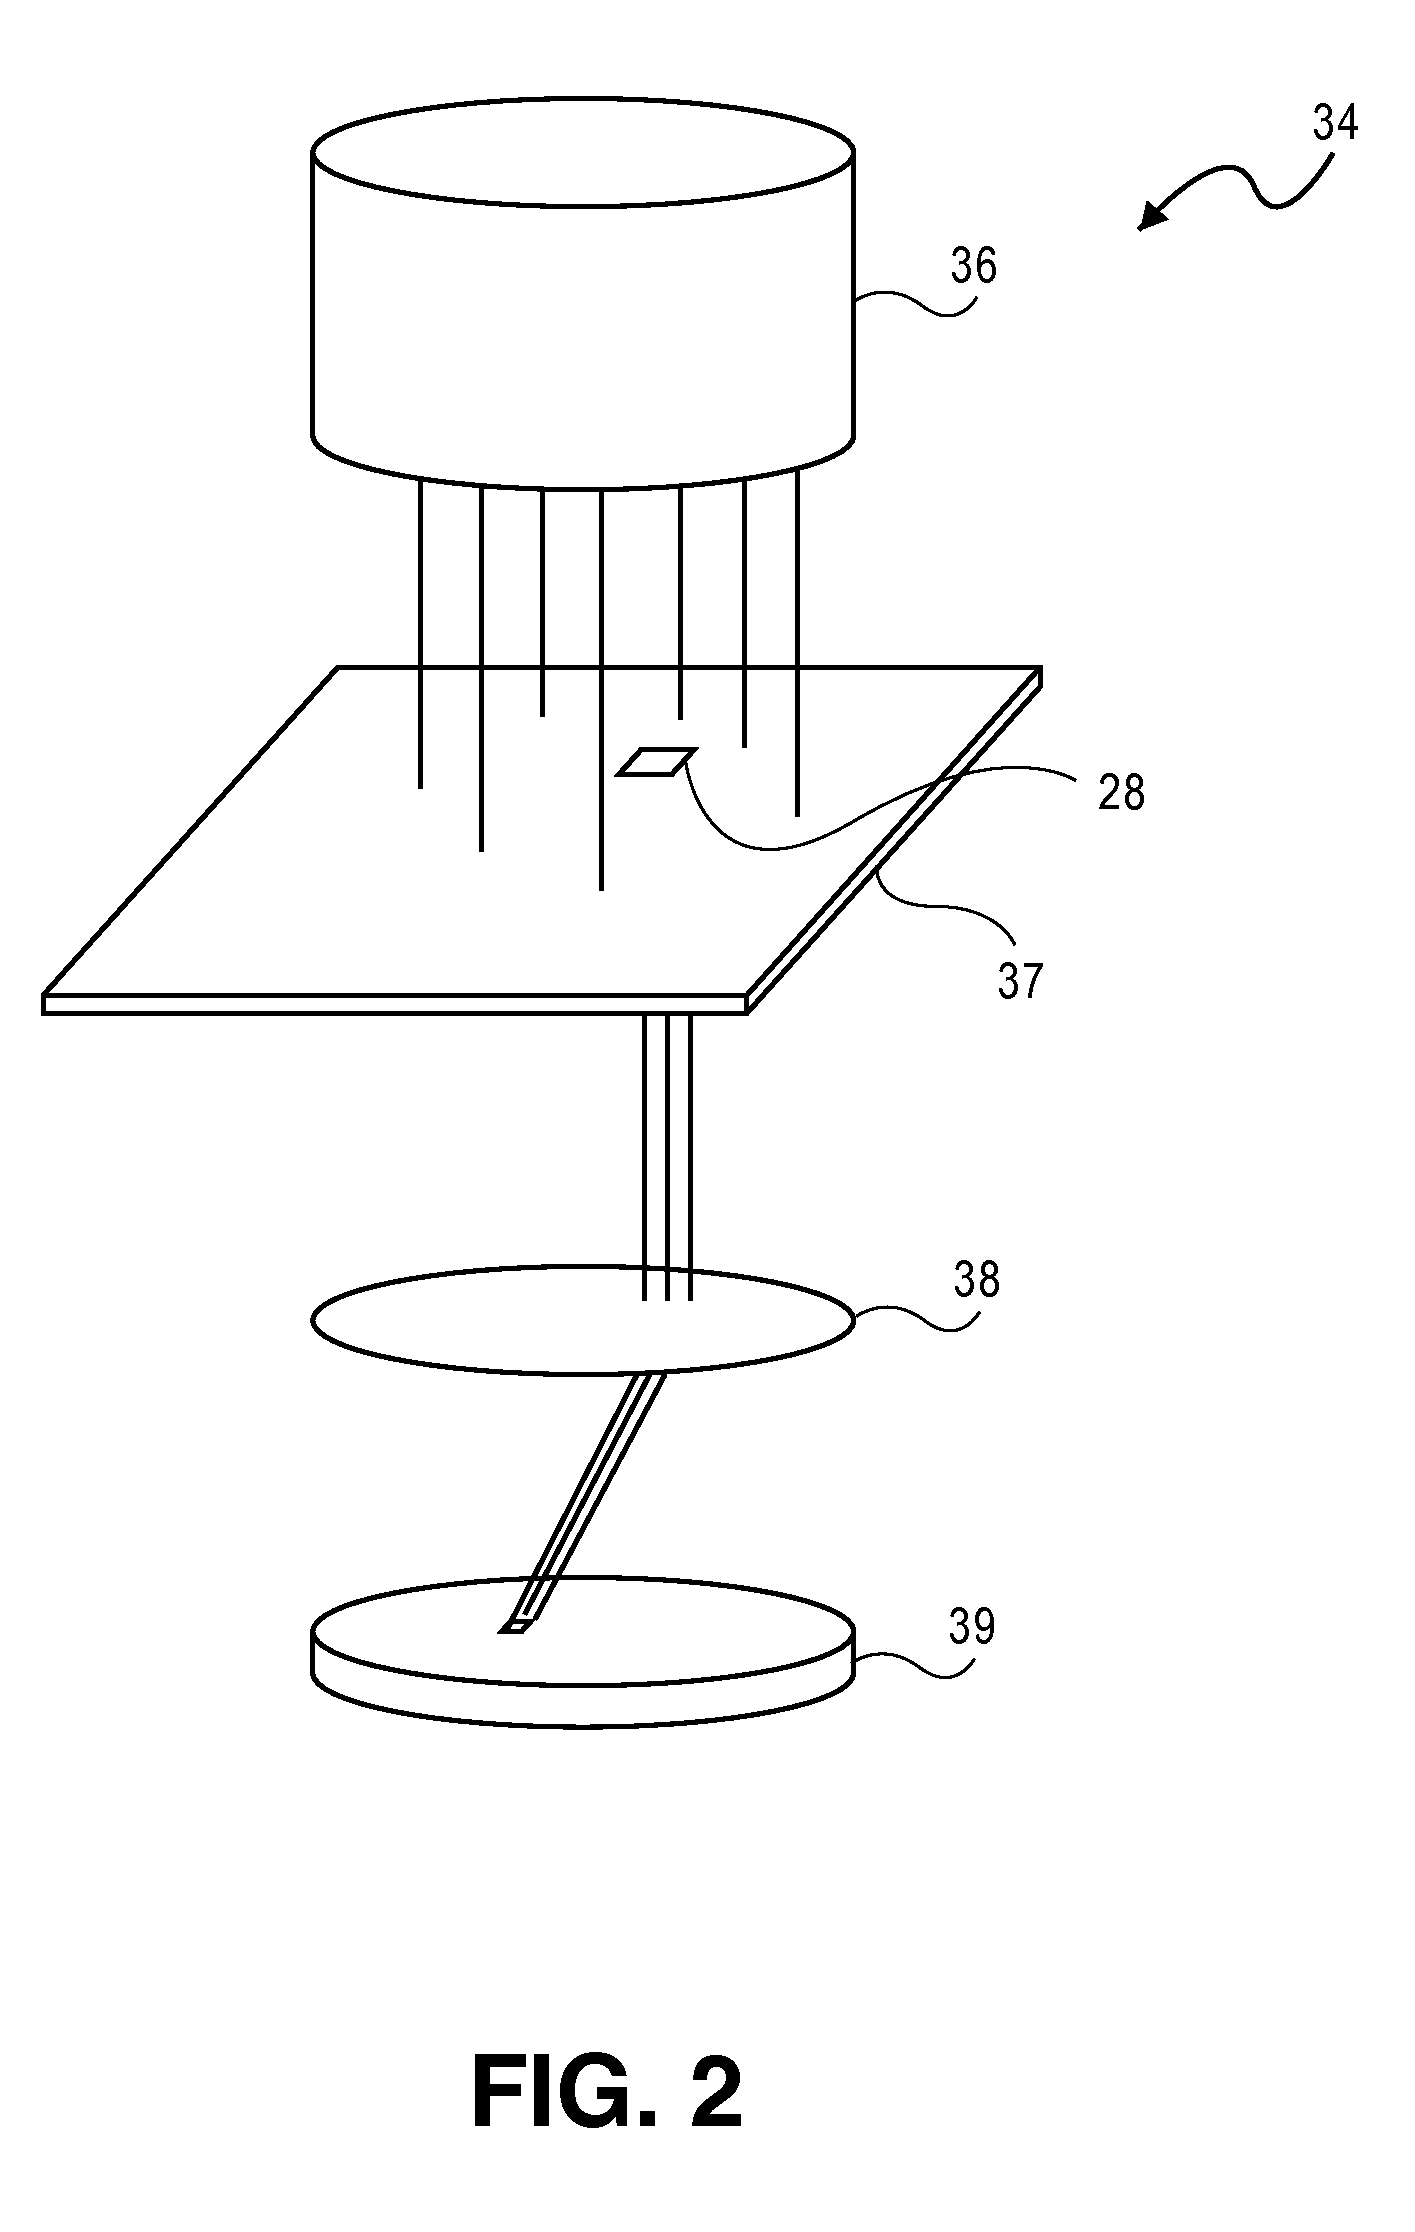 Method for Optical Proximity Correction of a Reticle to be Manufactured Using Variable Shaped Beam Lithography